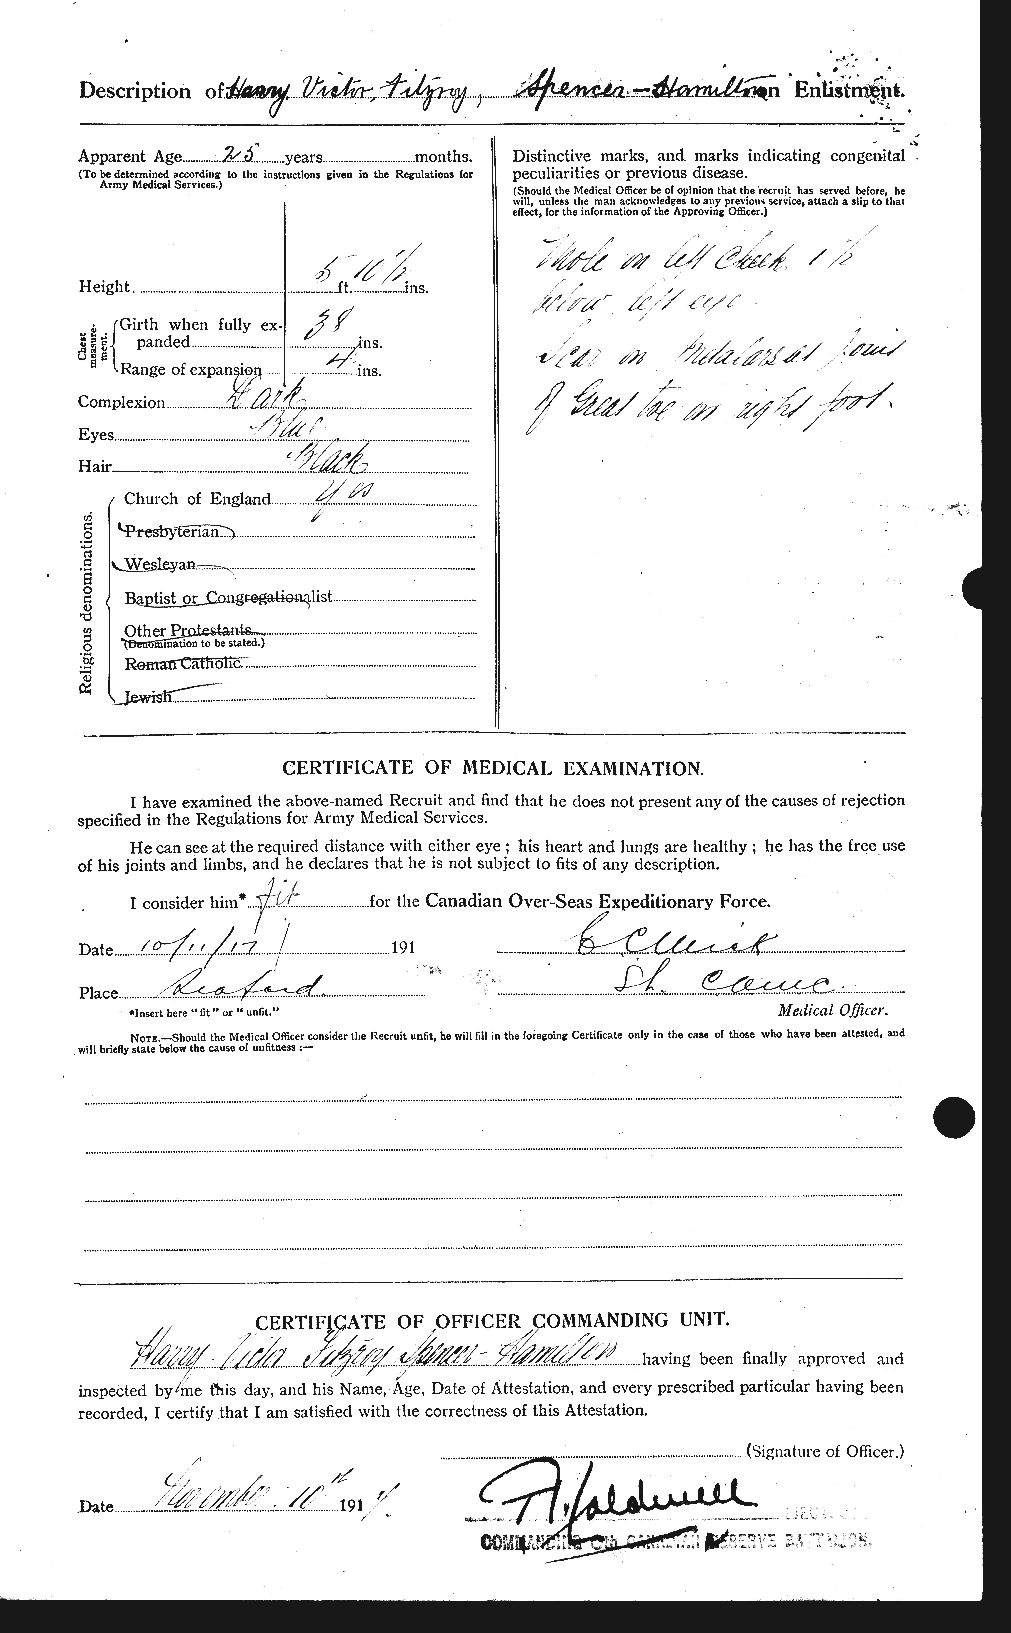 Personnel Records of the First World War - CEF 113985b